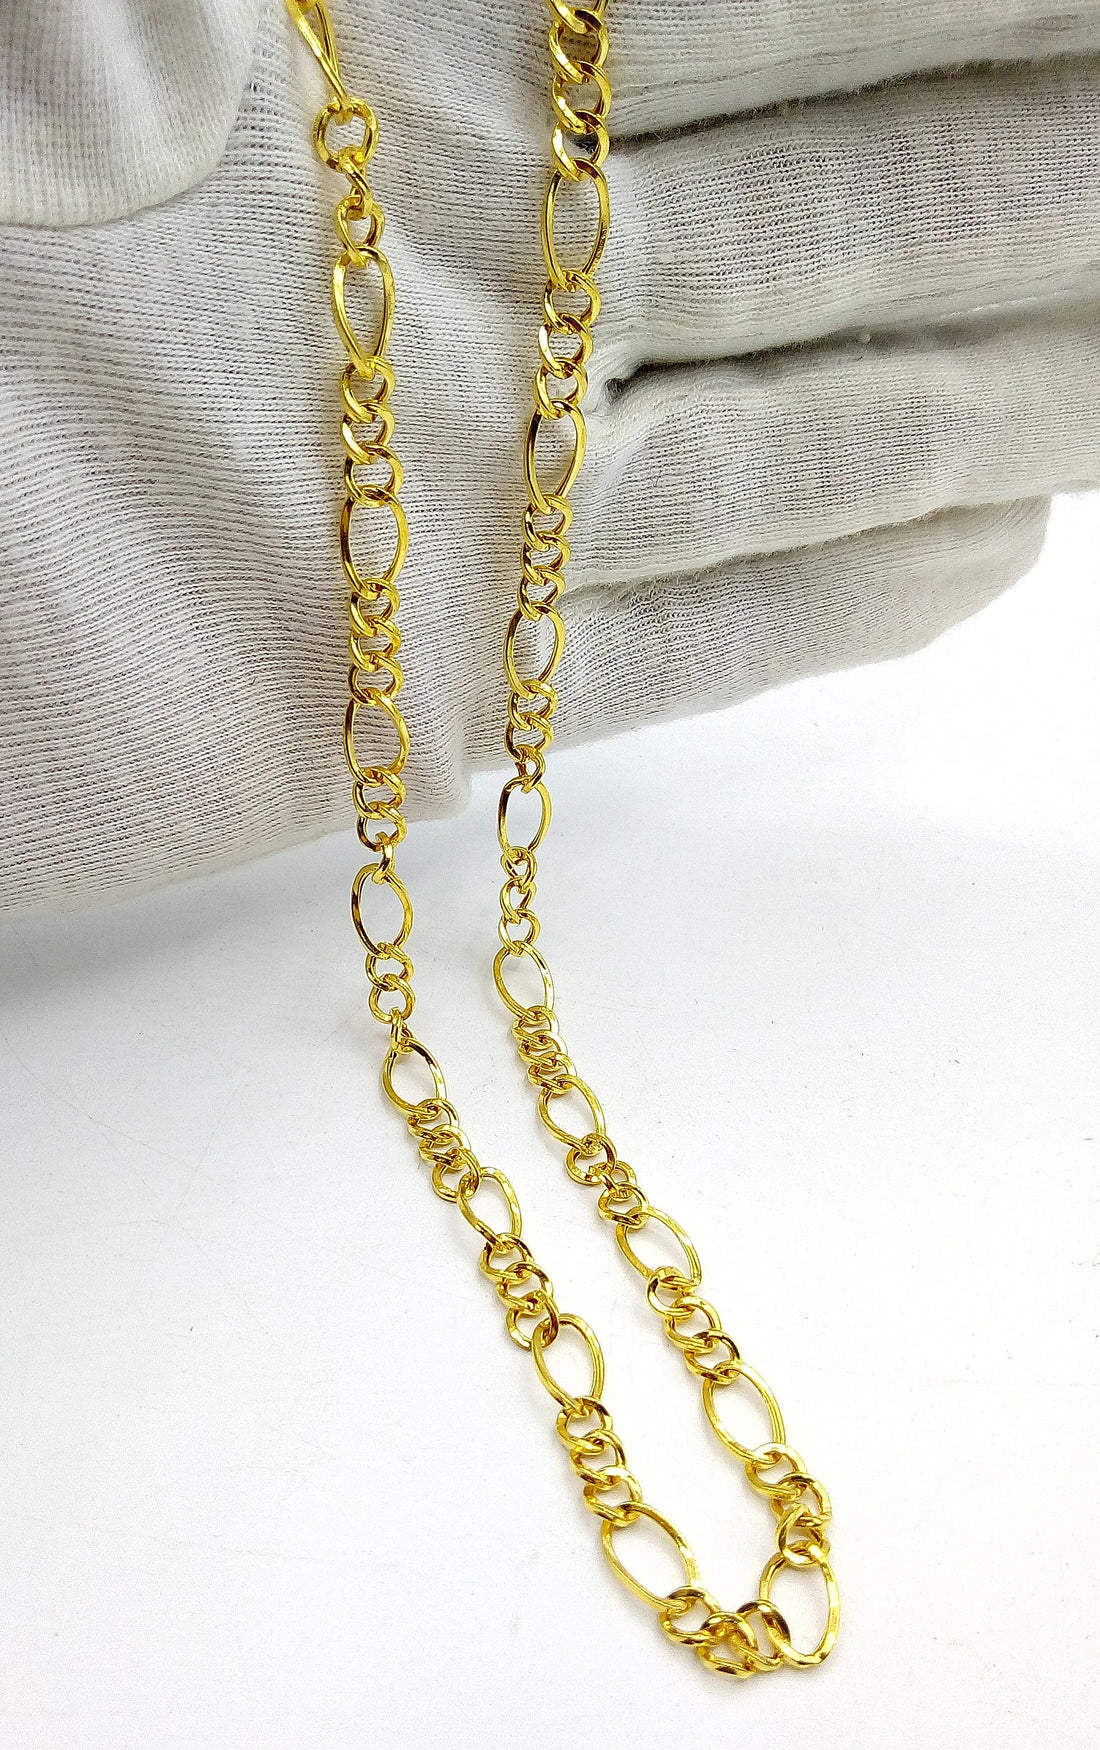 22kt yellow gold handmade fabulous light weight chain necklace unisex gifting figaro link chain certified royal india made chain necklace - TRIBAL ORNAMENTS